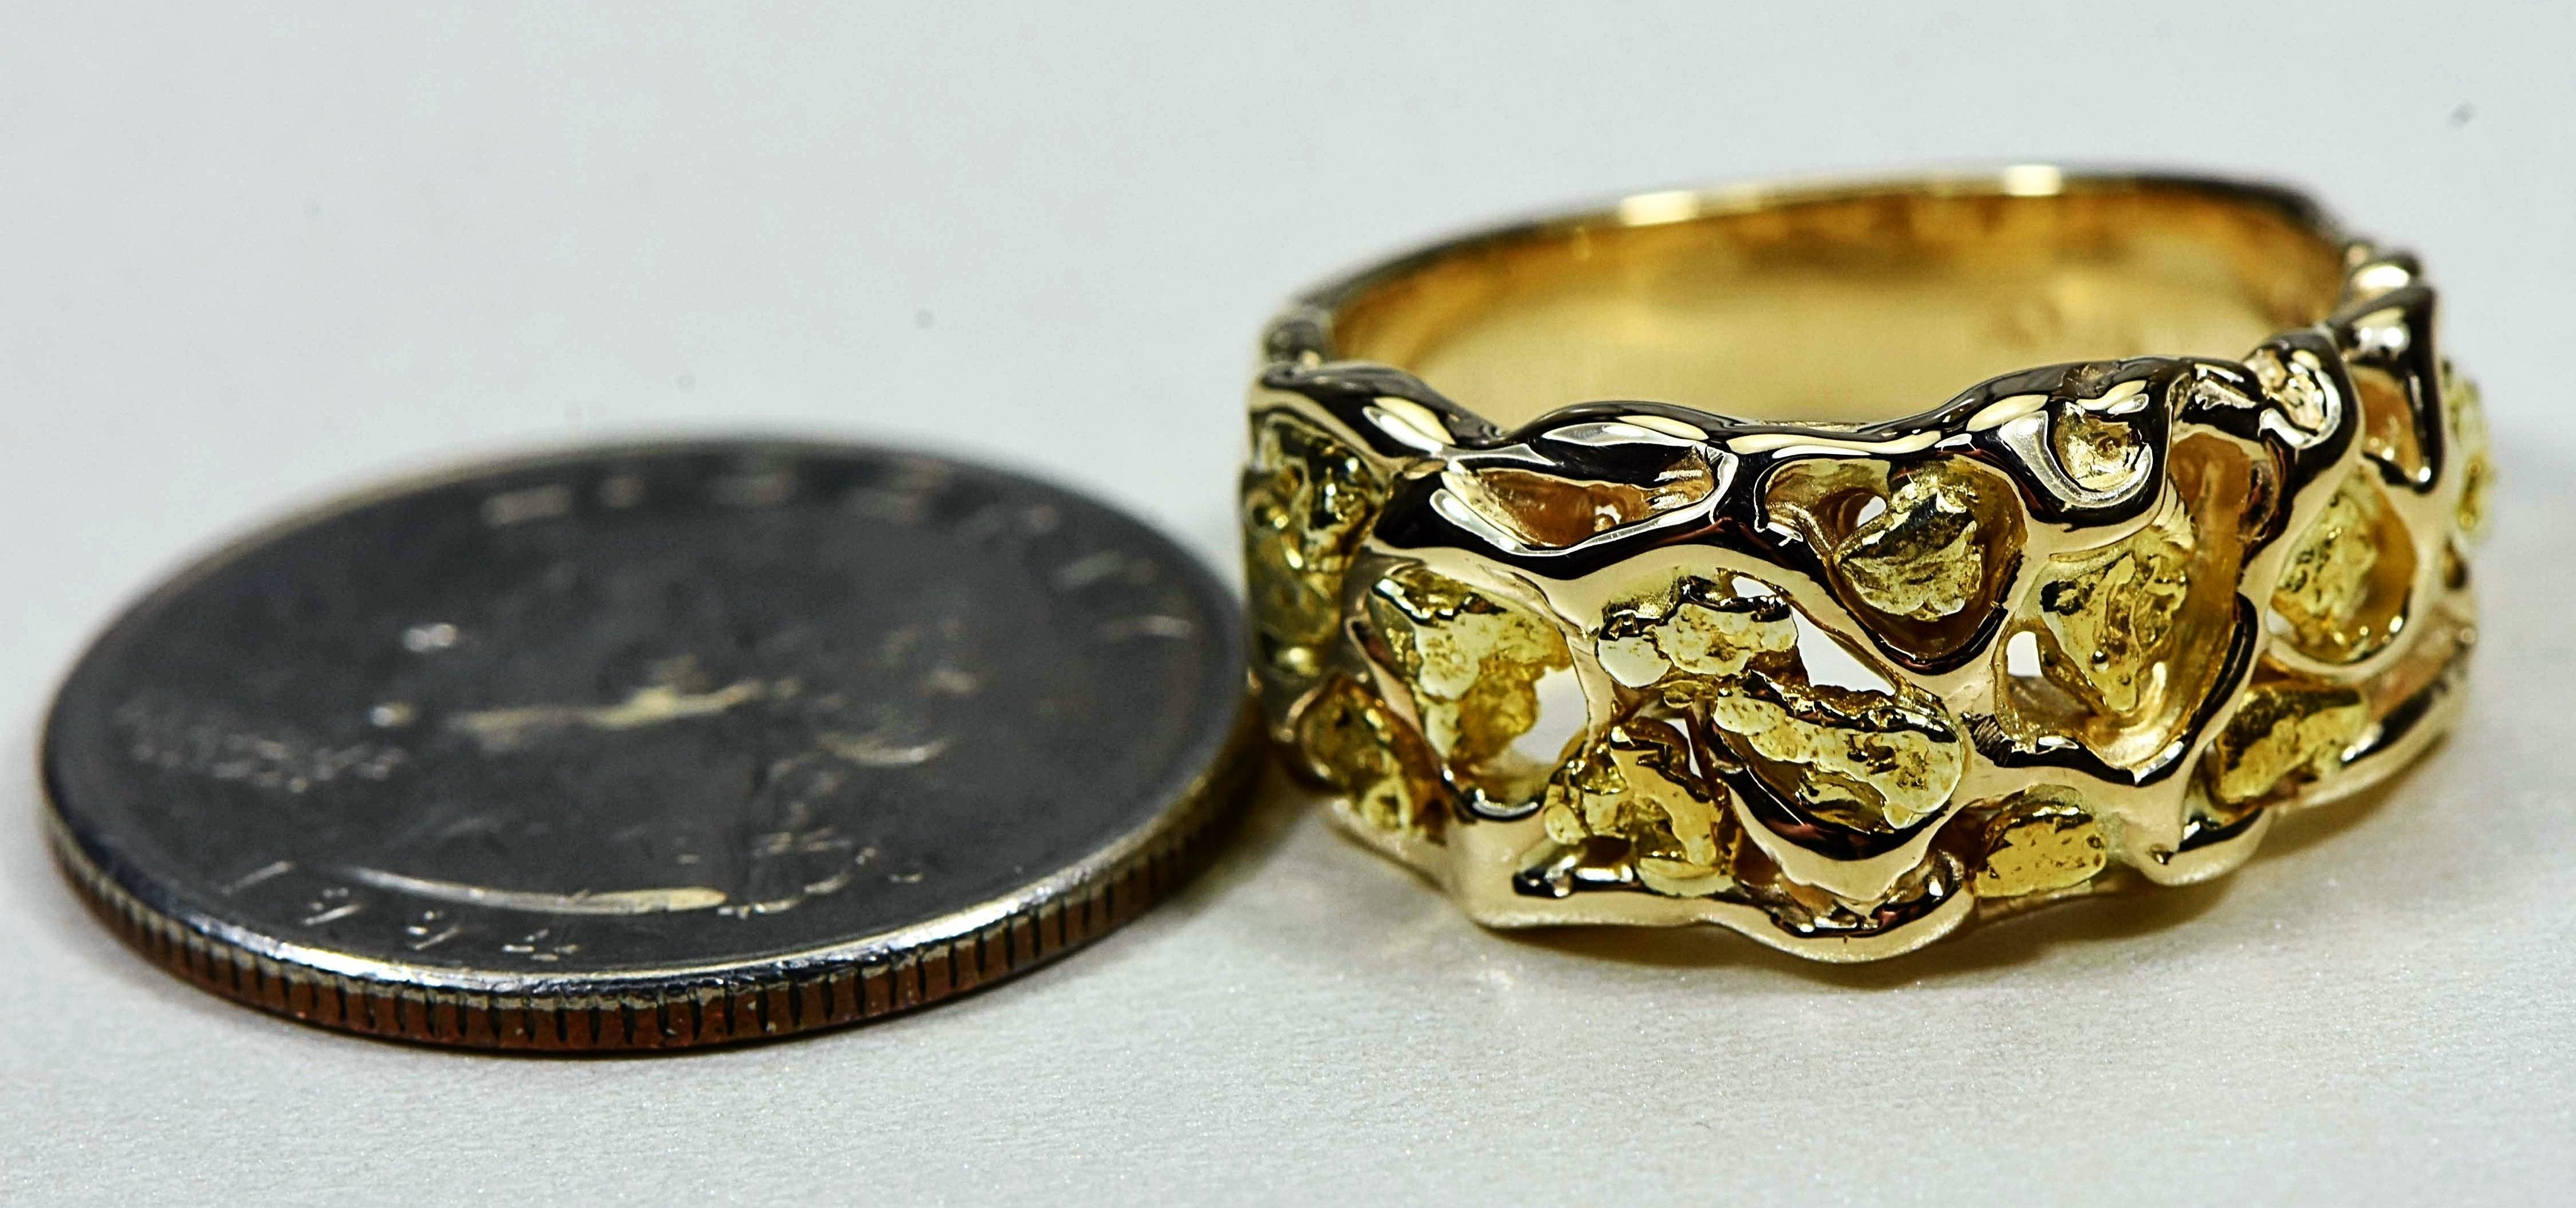 Gold Nugget Mens Ring Orocal Rm212 Genuine Hand Crafted Jewelry - 14K Casting